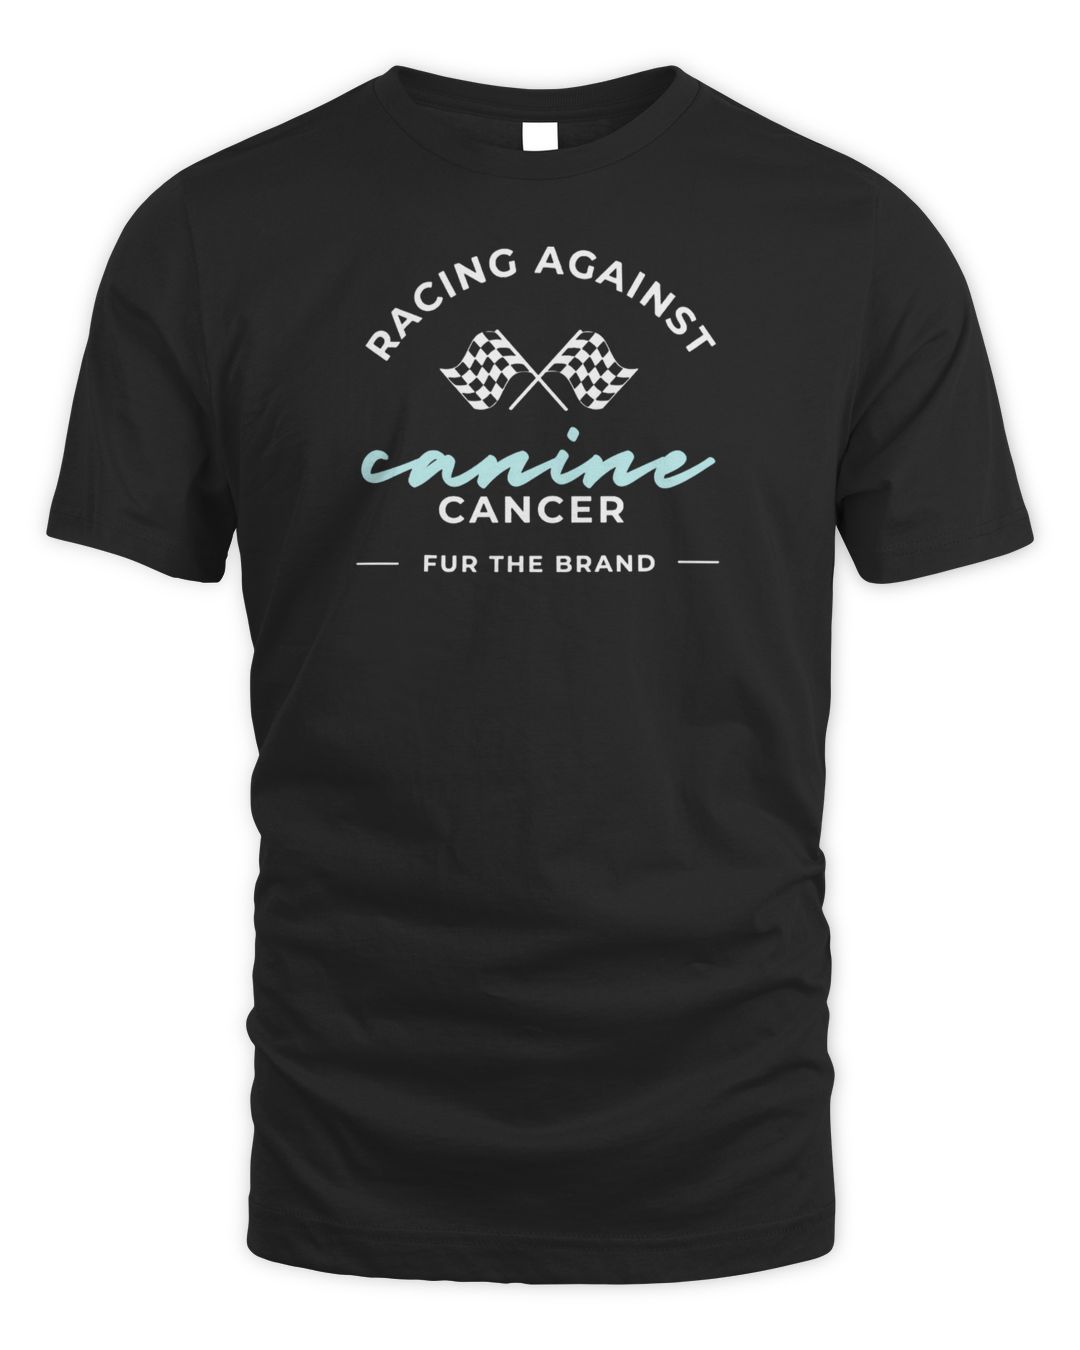 Pat Mcafee Merch Racing Against Canine Cancer Shirt